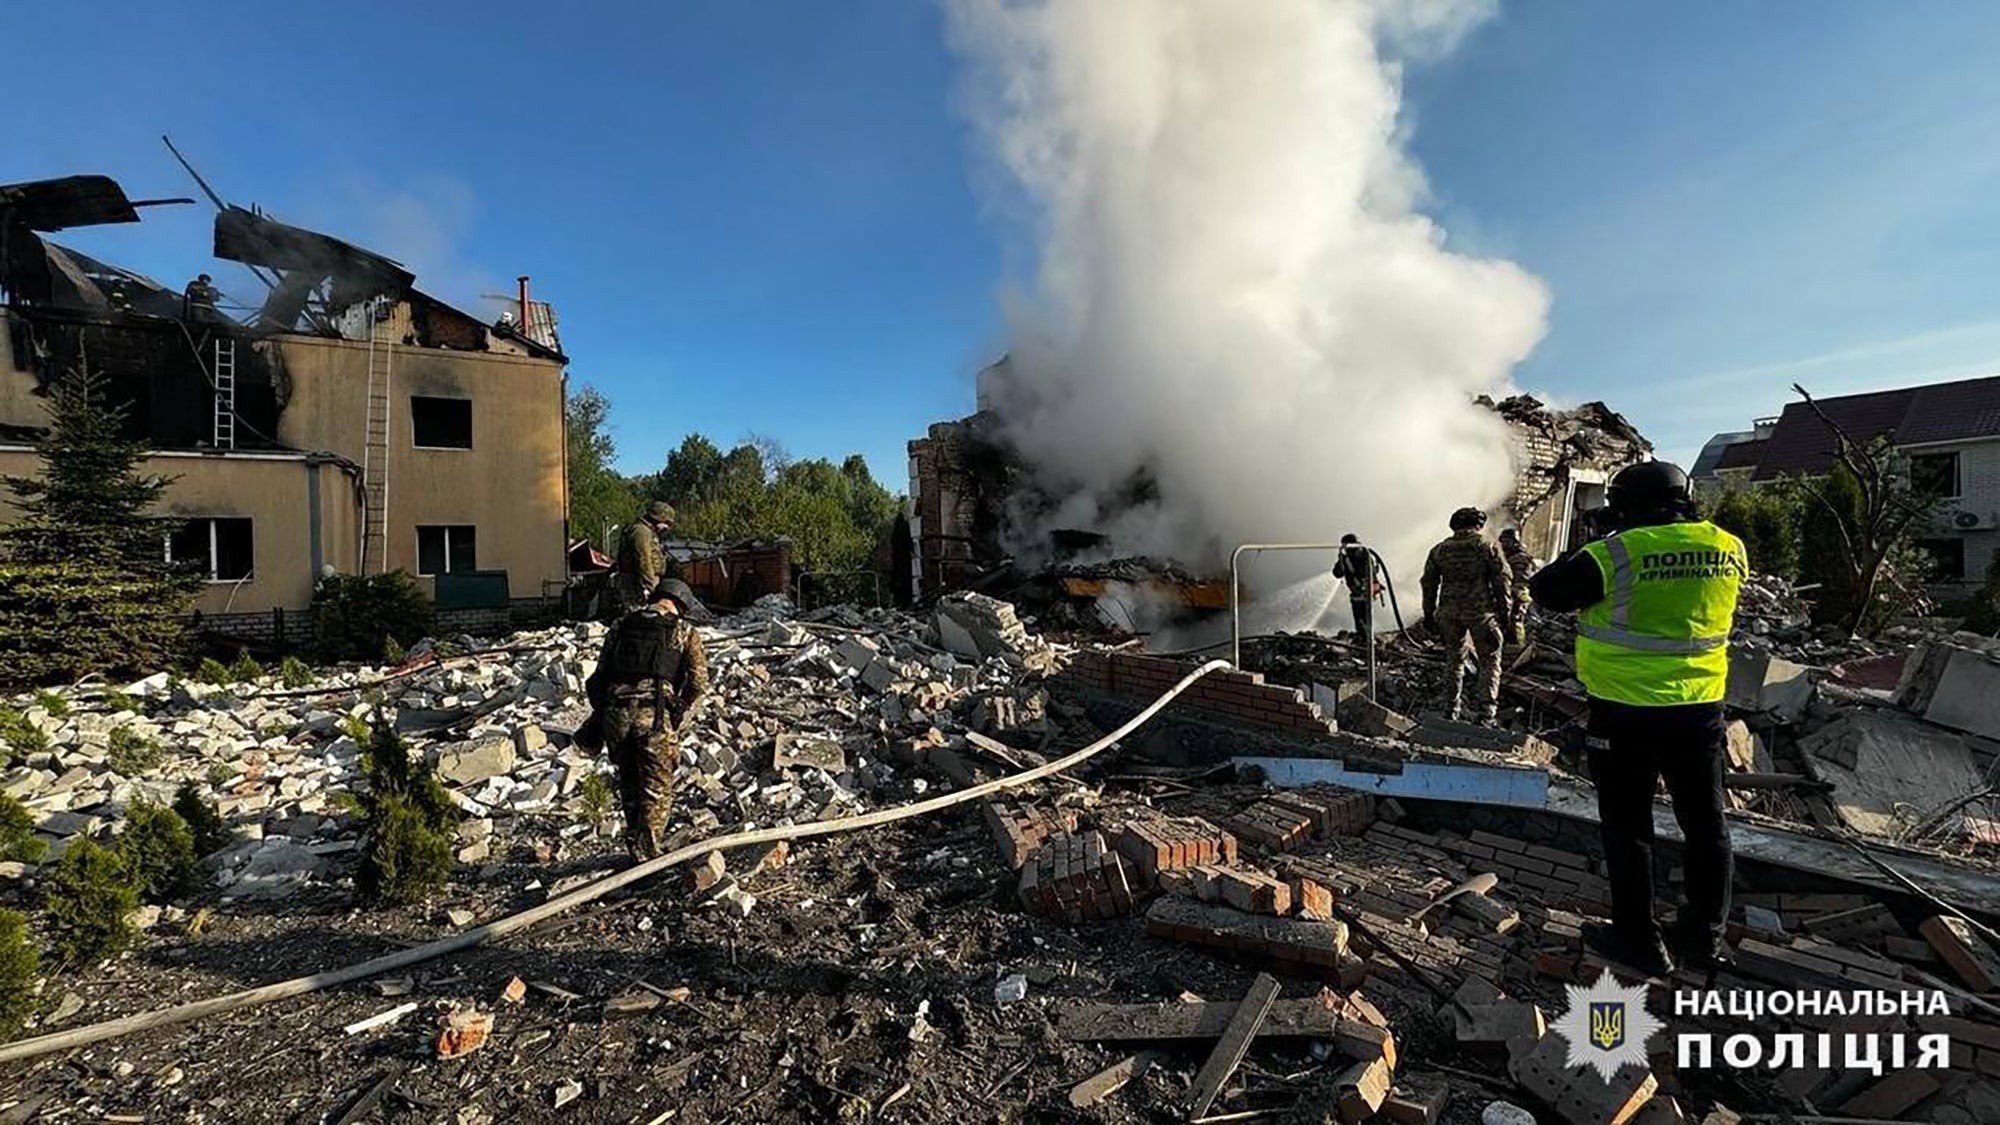 Employees of the State Emergency Service extinguishing fires of private houses destroyed by a shelling in Kharkiv, northeastern Ukraine